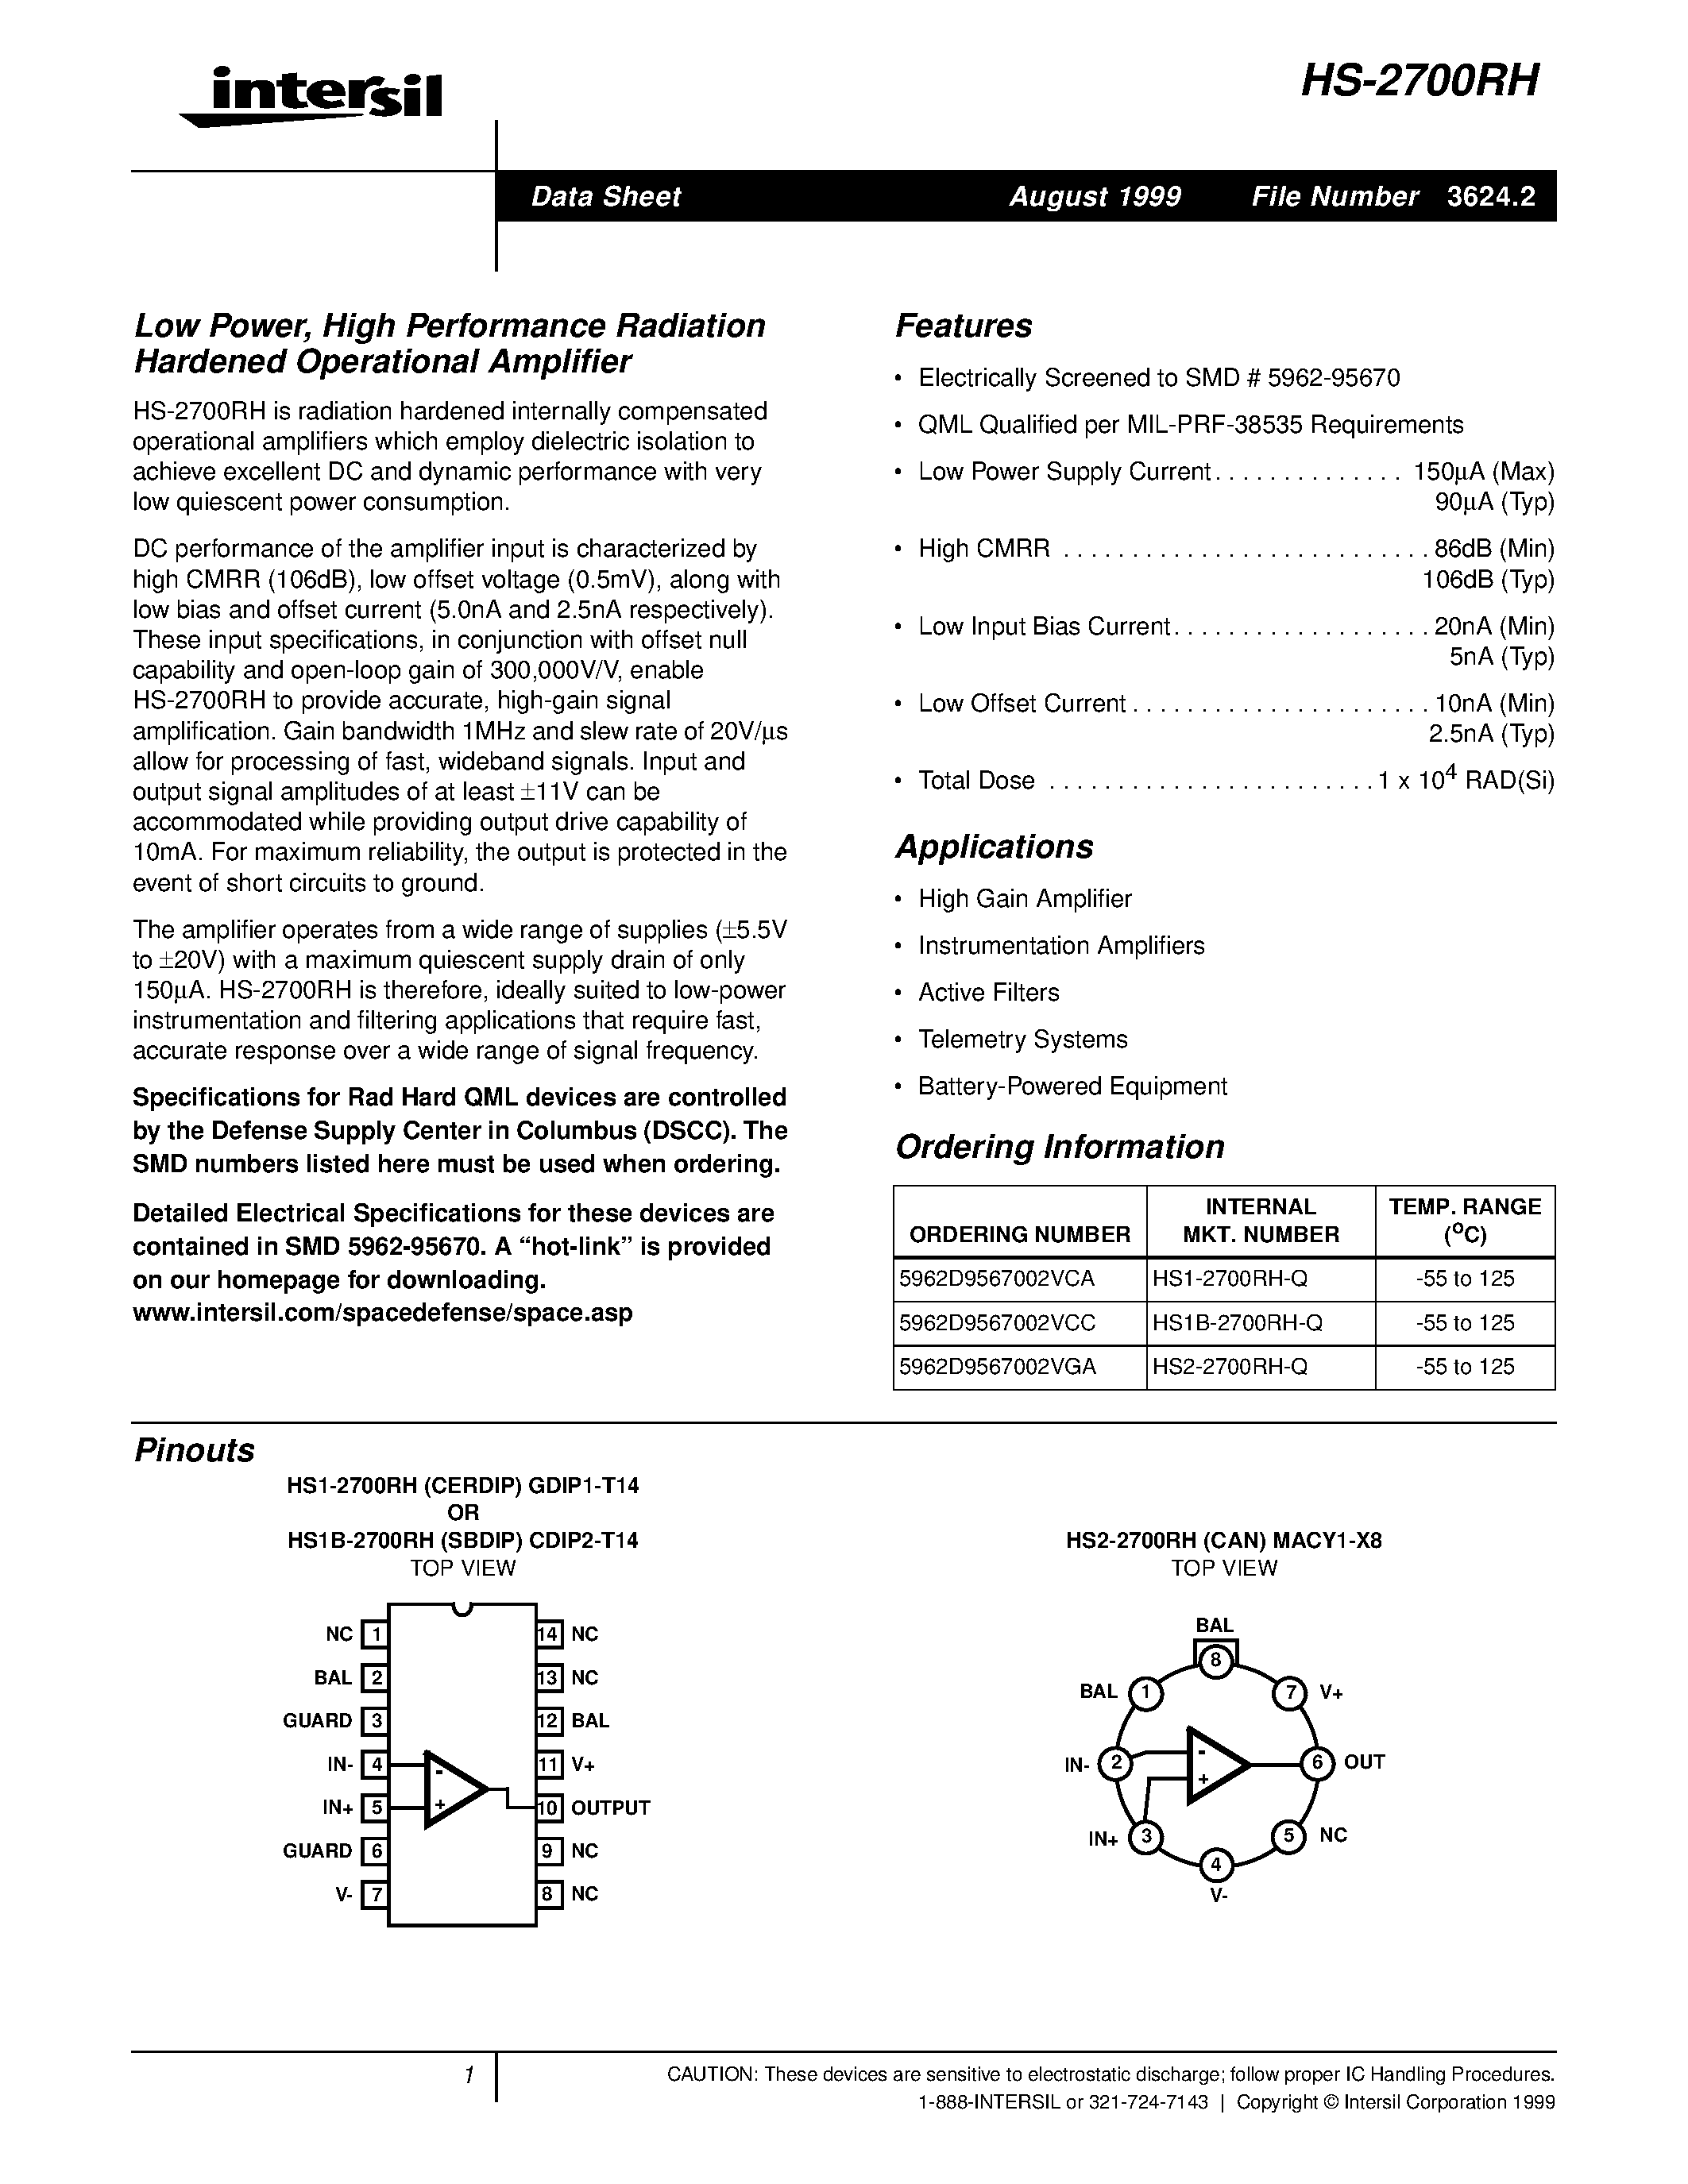 Datasheet HS1-2700RH-Q - Low Power/ High Performance Radiation Hardened Operational Amplifier page 1